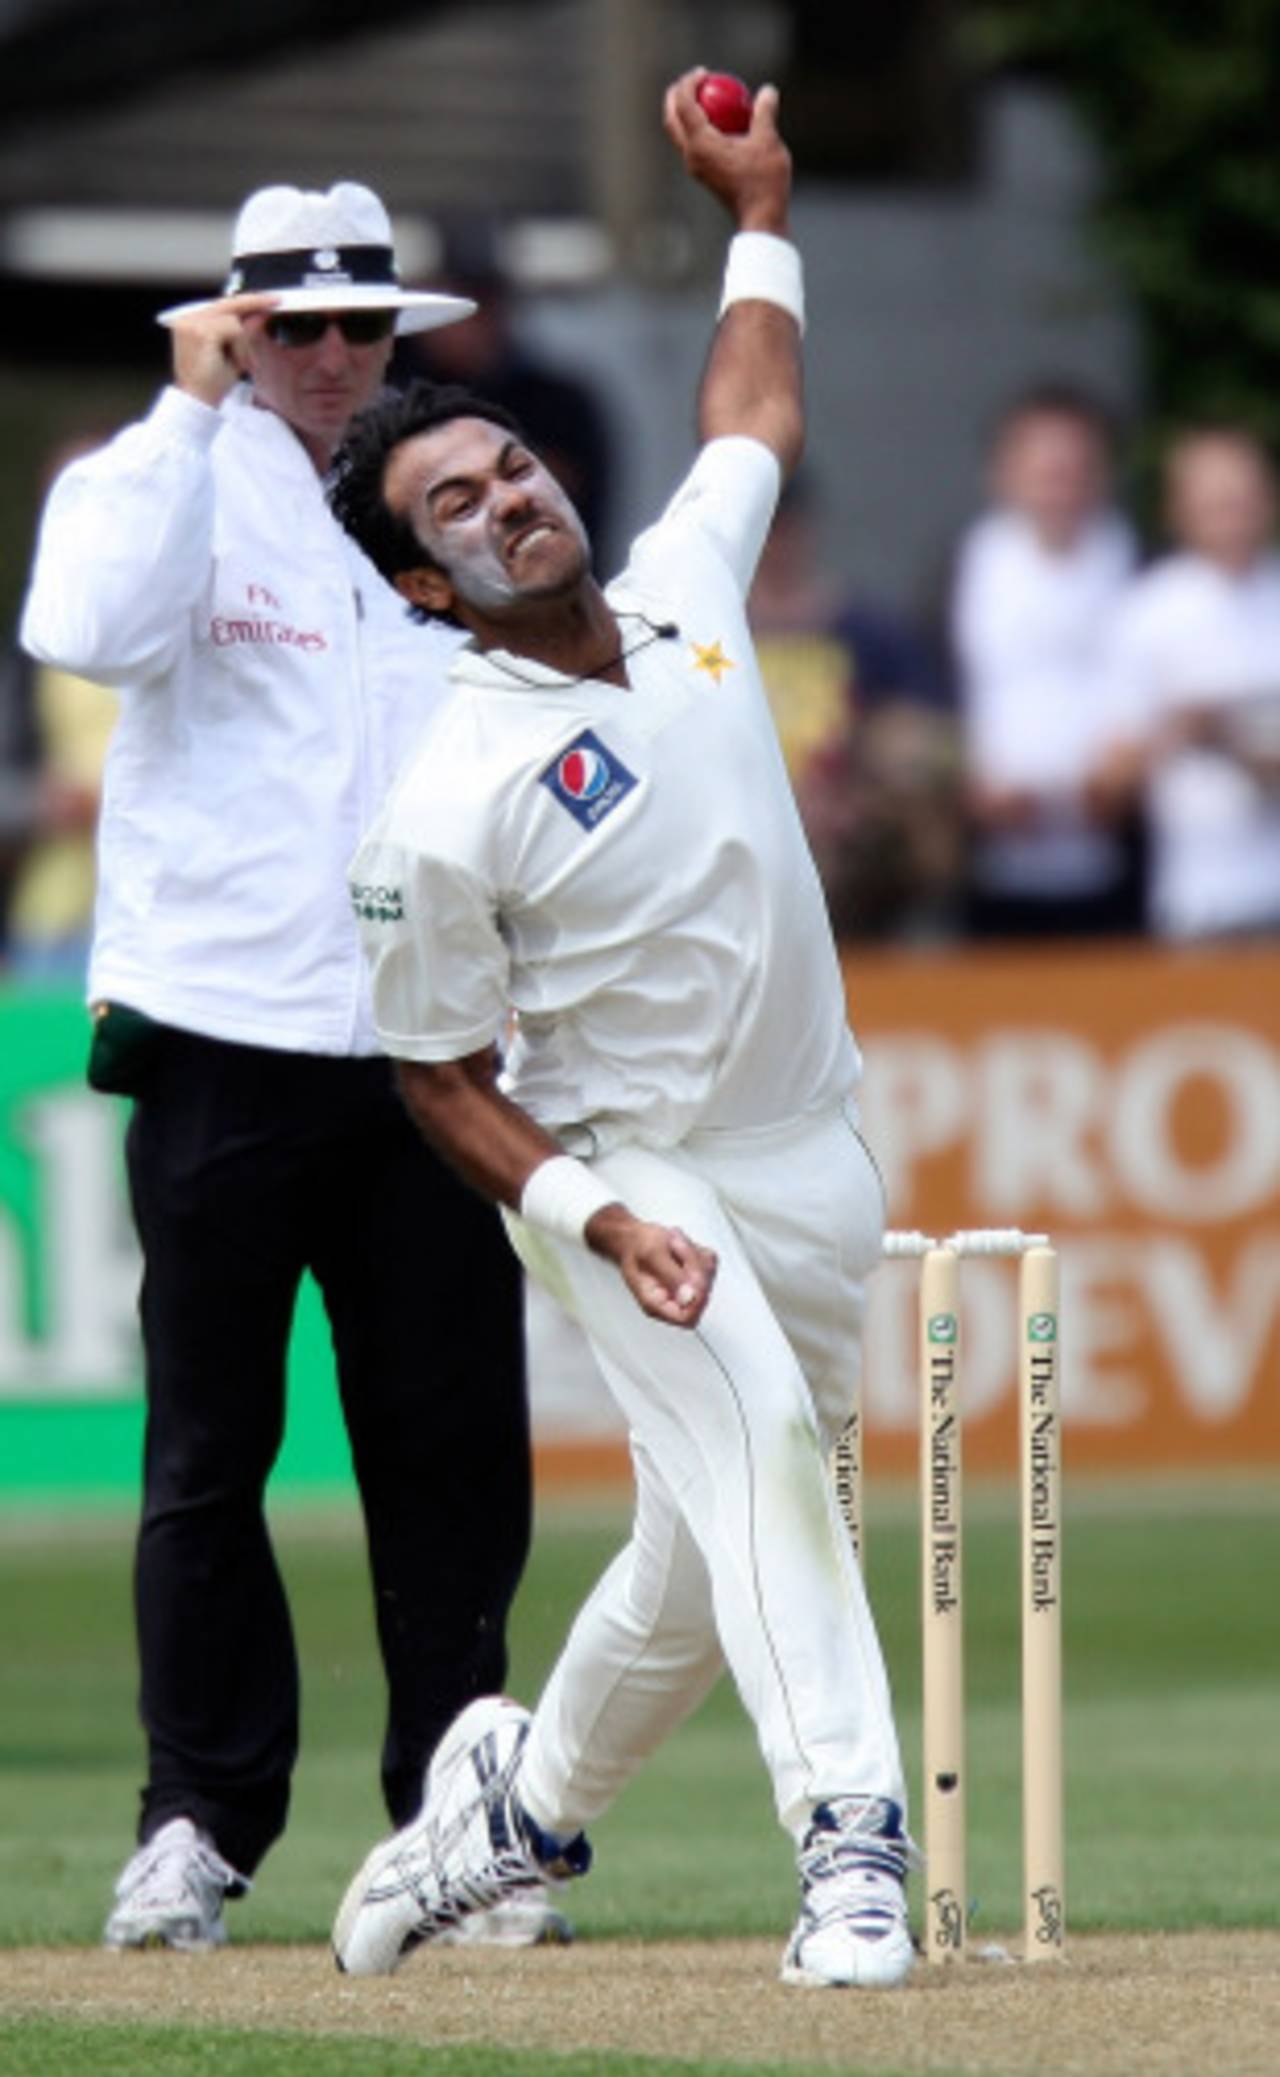 Wahab Riaz put in the fielding effort of the day while trying to retrieve his cap which was blown towards the boundary by the wind&nbsp;&nbsp;&bull;&nbsp;&nbsp;Getty Images